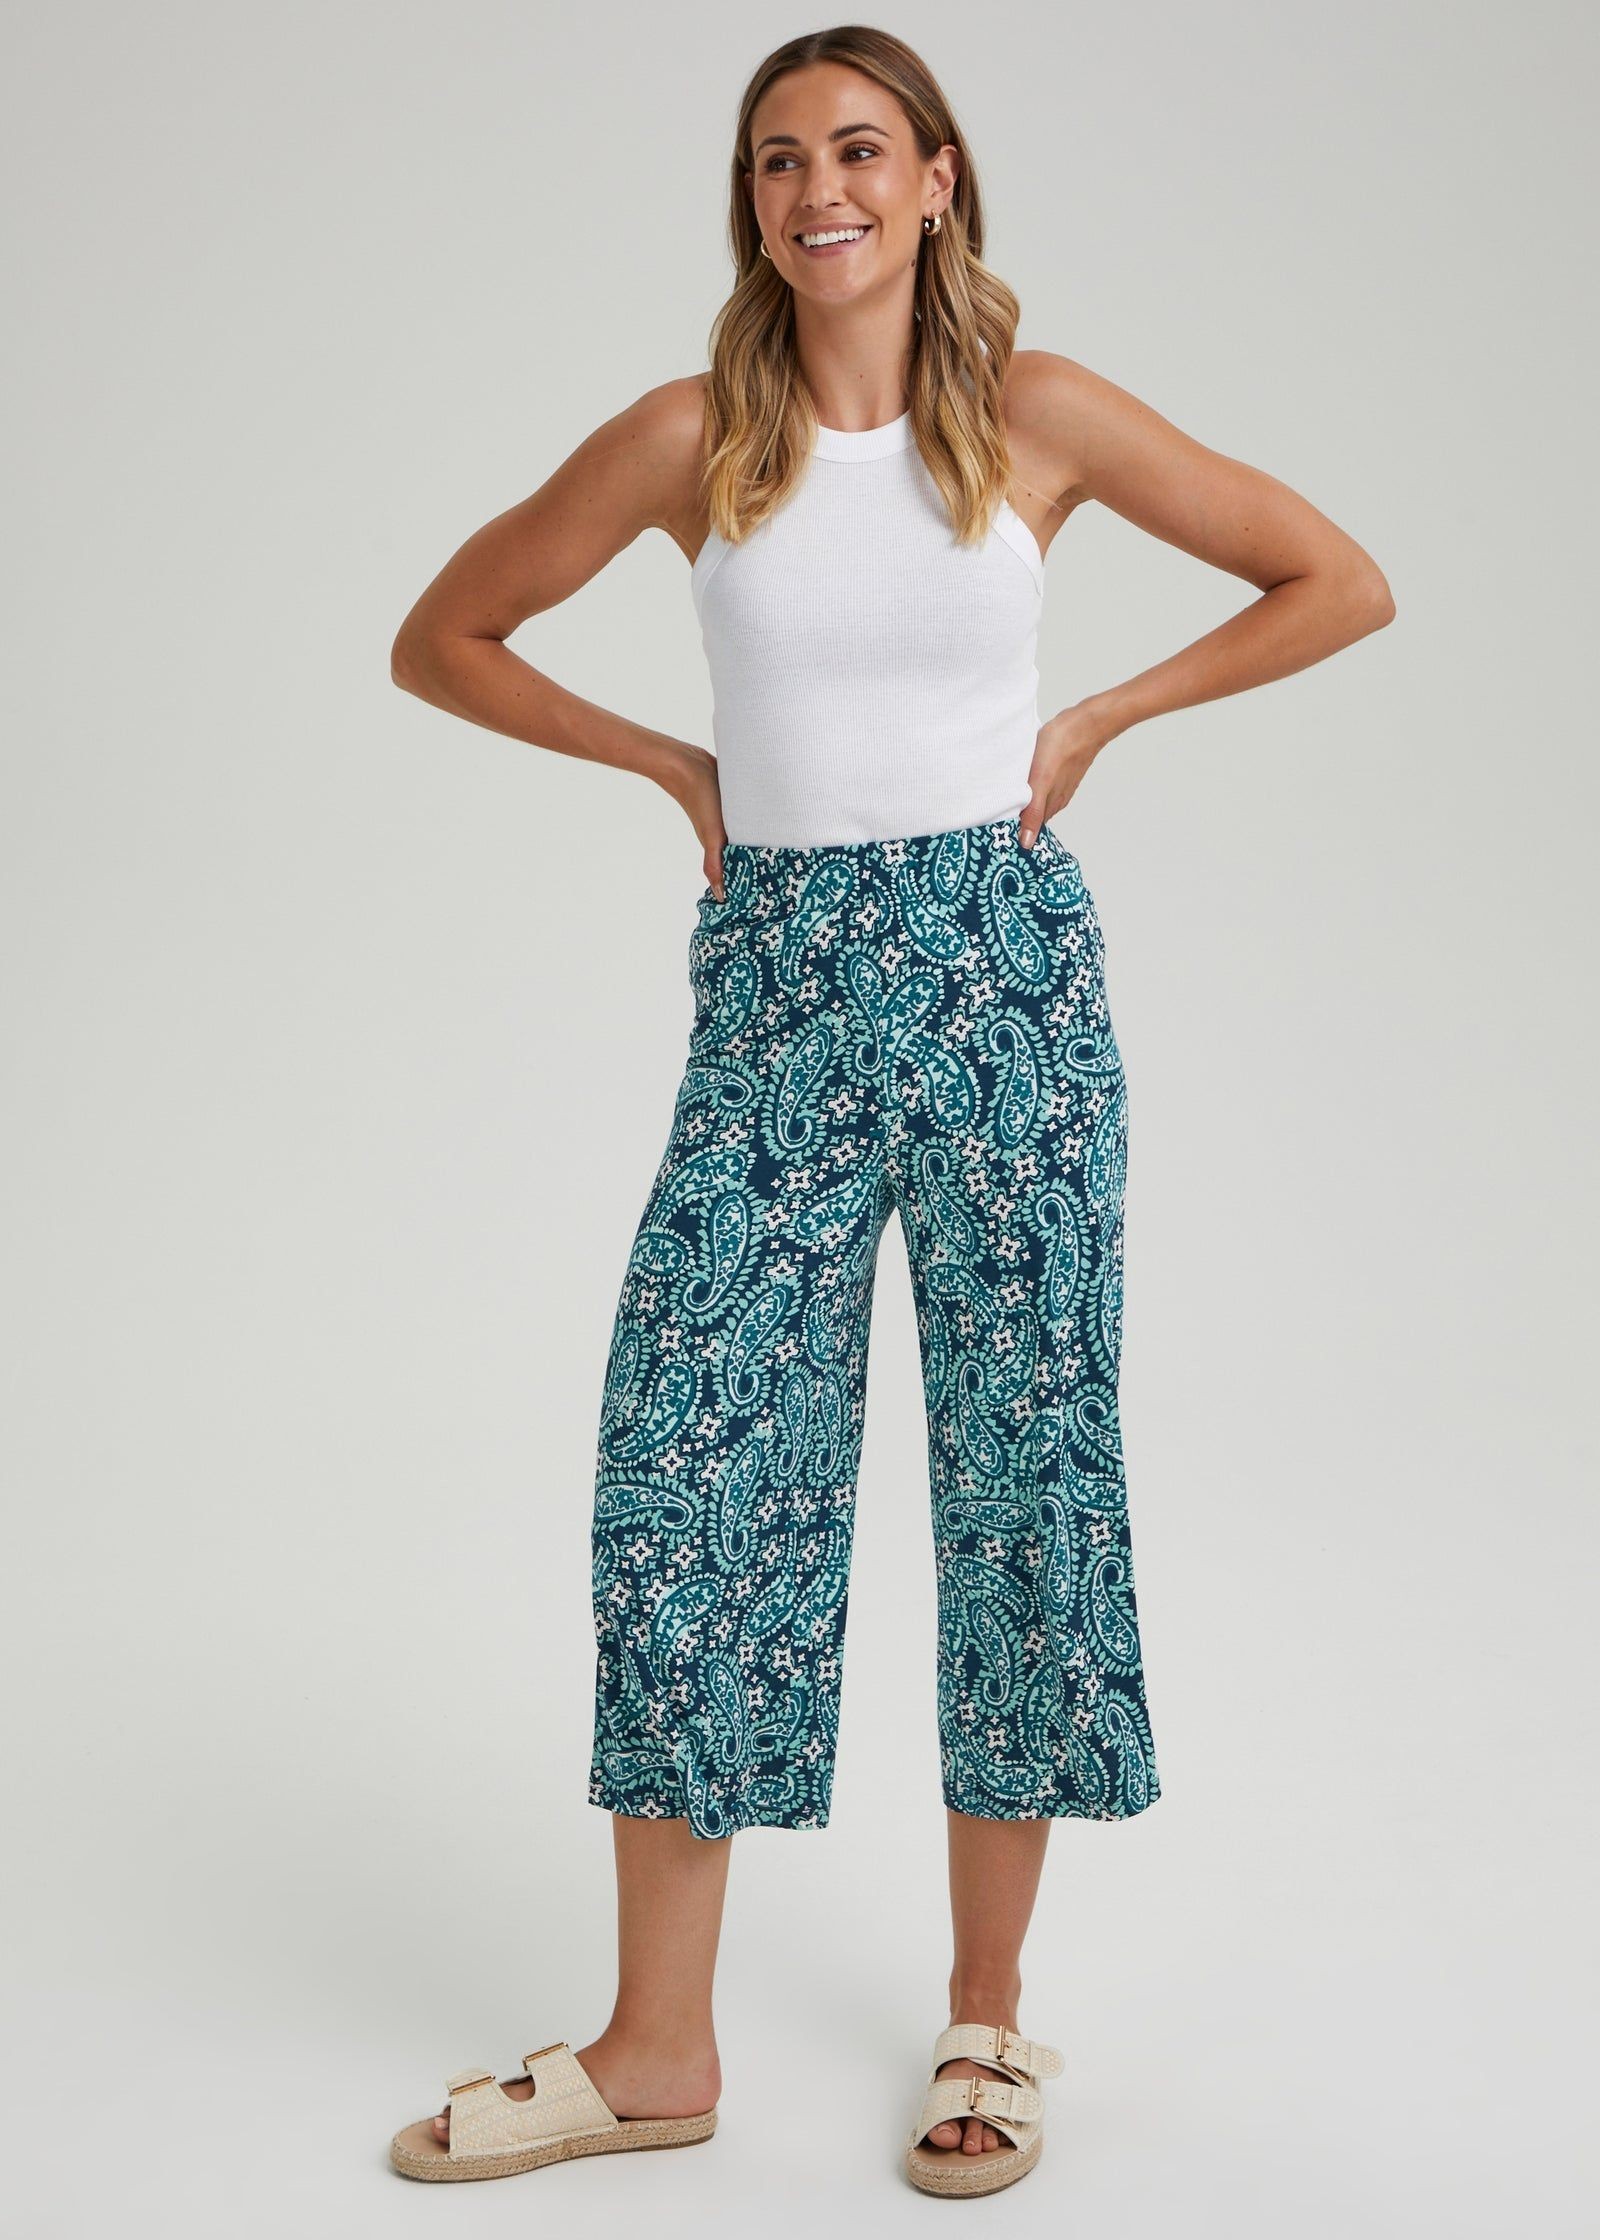 Buy Womens Trousers at Lowest Price from Matalan Oman